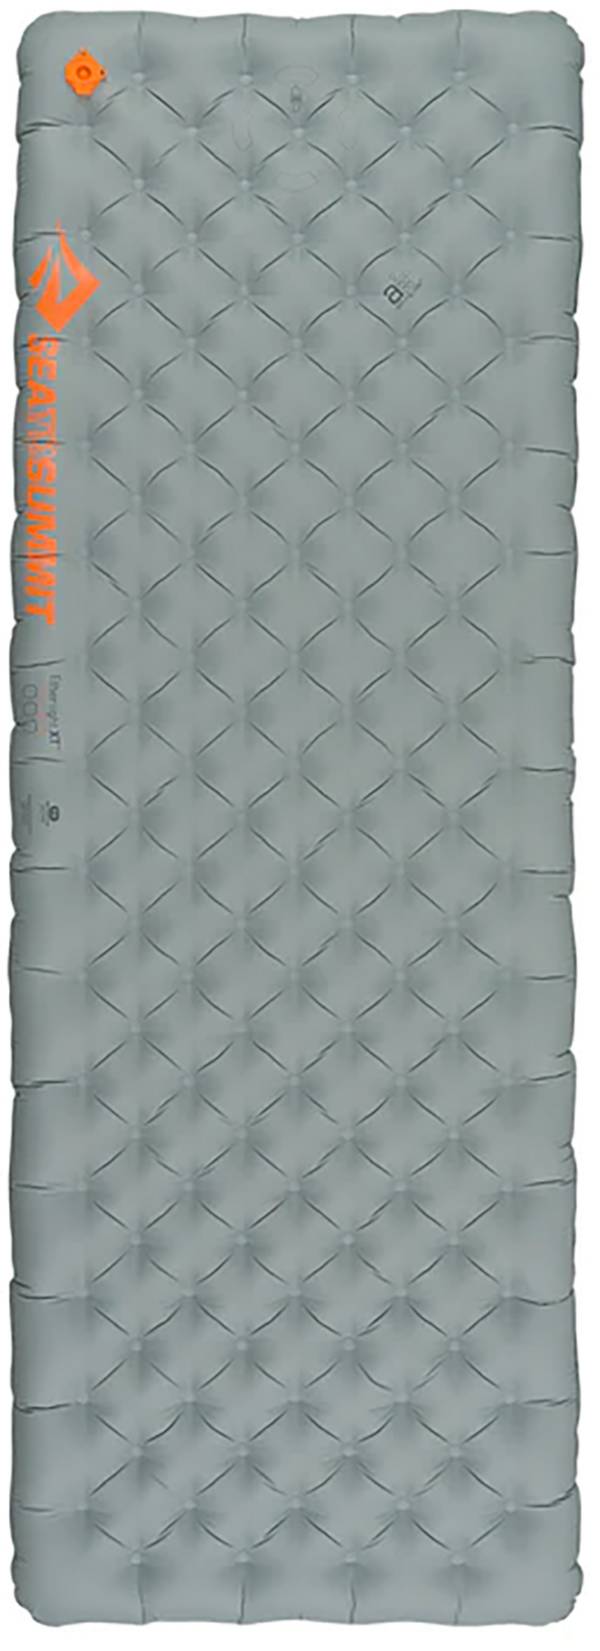 Sea to Summit Ether Light XT Insulated Mat product image